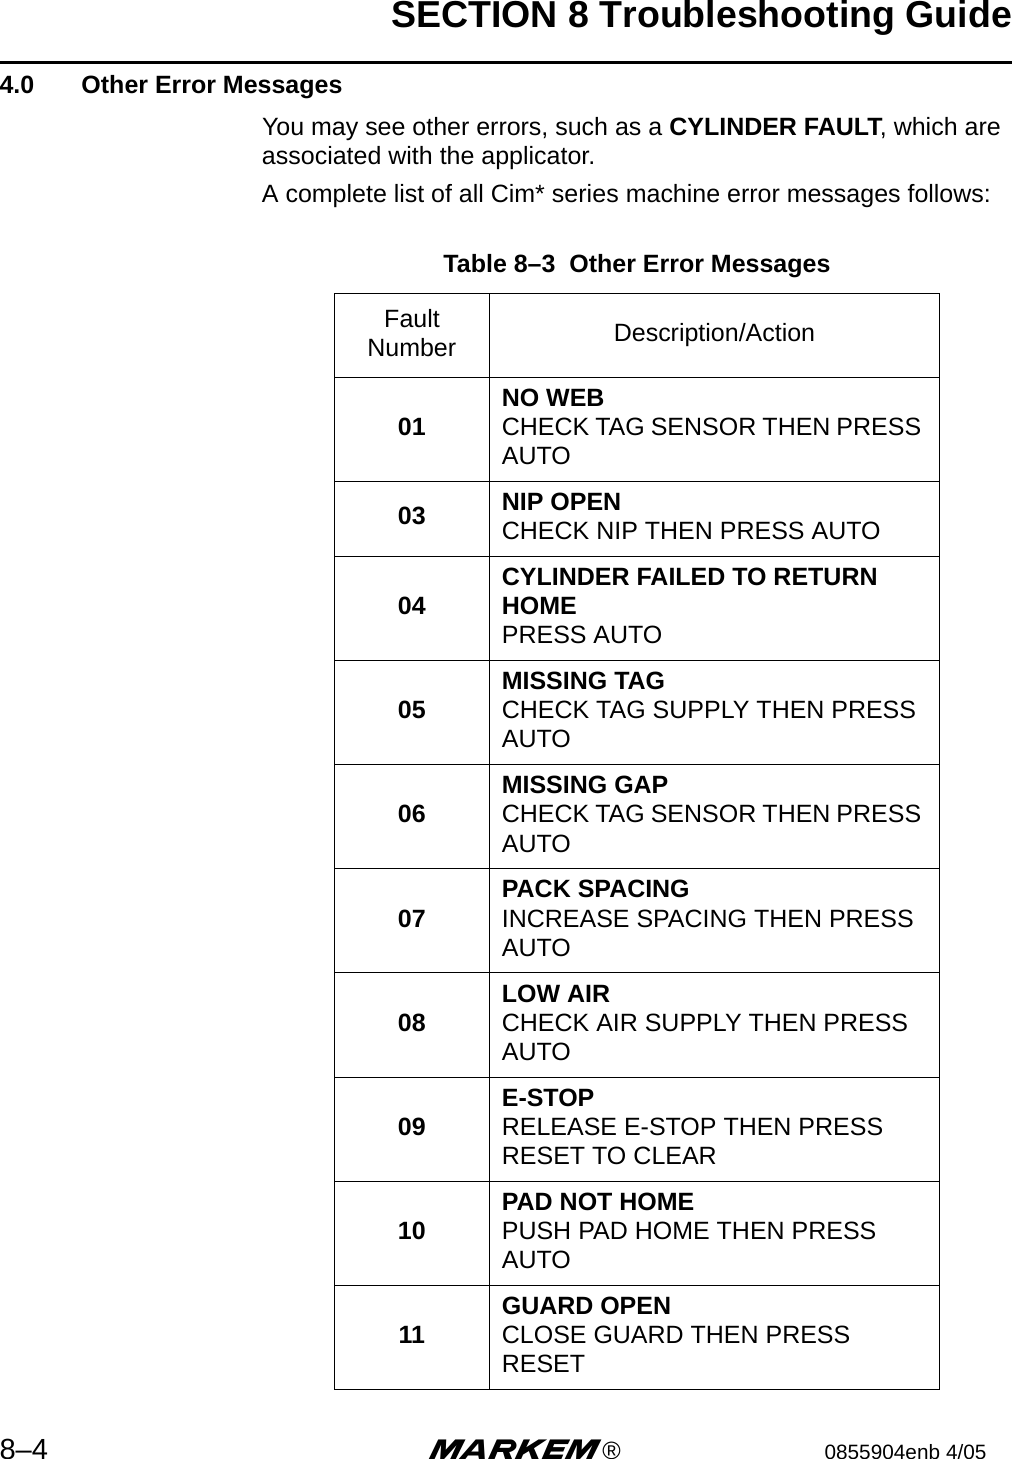 SECTION 8 Troubleshooting Guide8–4 m®0855904enb 4/05 4.0  Other Error MessagesYou may see other errors, such as a CYLINDER FAULT, which are associated with the applicator. A complete list of all Cim* series machine error messages follows:Table 8–3  Other Error MessagesFault Number Description/Action01 NO WEBCHECK TAG SENSOR THEN PRESS AUTO03 NIP OPENCHECK NIP THEN PRESS AUTO04 CYLINDER FAILED TO RETURN HOMEPRESS AUTO05 MISSING TAGCHECK TAG SUPPLY THEN PRESS AUTO06 MISSING GAPCHECK TAG SENSOR THEN PRESS AUTO07 PACK SPACINGINCREASE SPACING THEN PRESS AUTO08 LOW AIRCHECK AIR SUPPLY THEN PRESS AUTO09 E-STOPRELEASE E-STOP THEN PRESS RESET TO CLEAR10 PAD NOT HOMEPUSH PAD HOME THEN PRESS AUTO11 GUARD OPENCLOSE GUARD THEN PRESS RESET